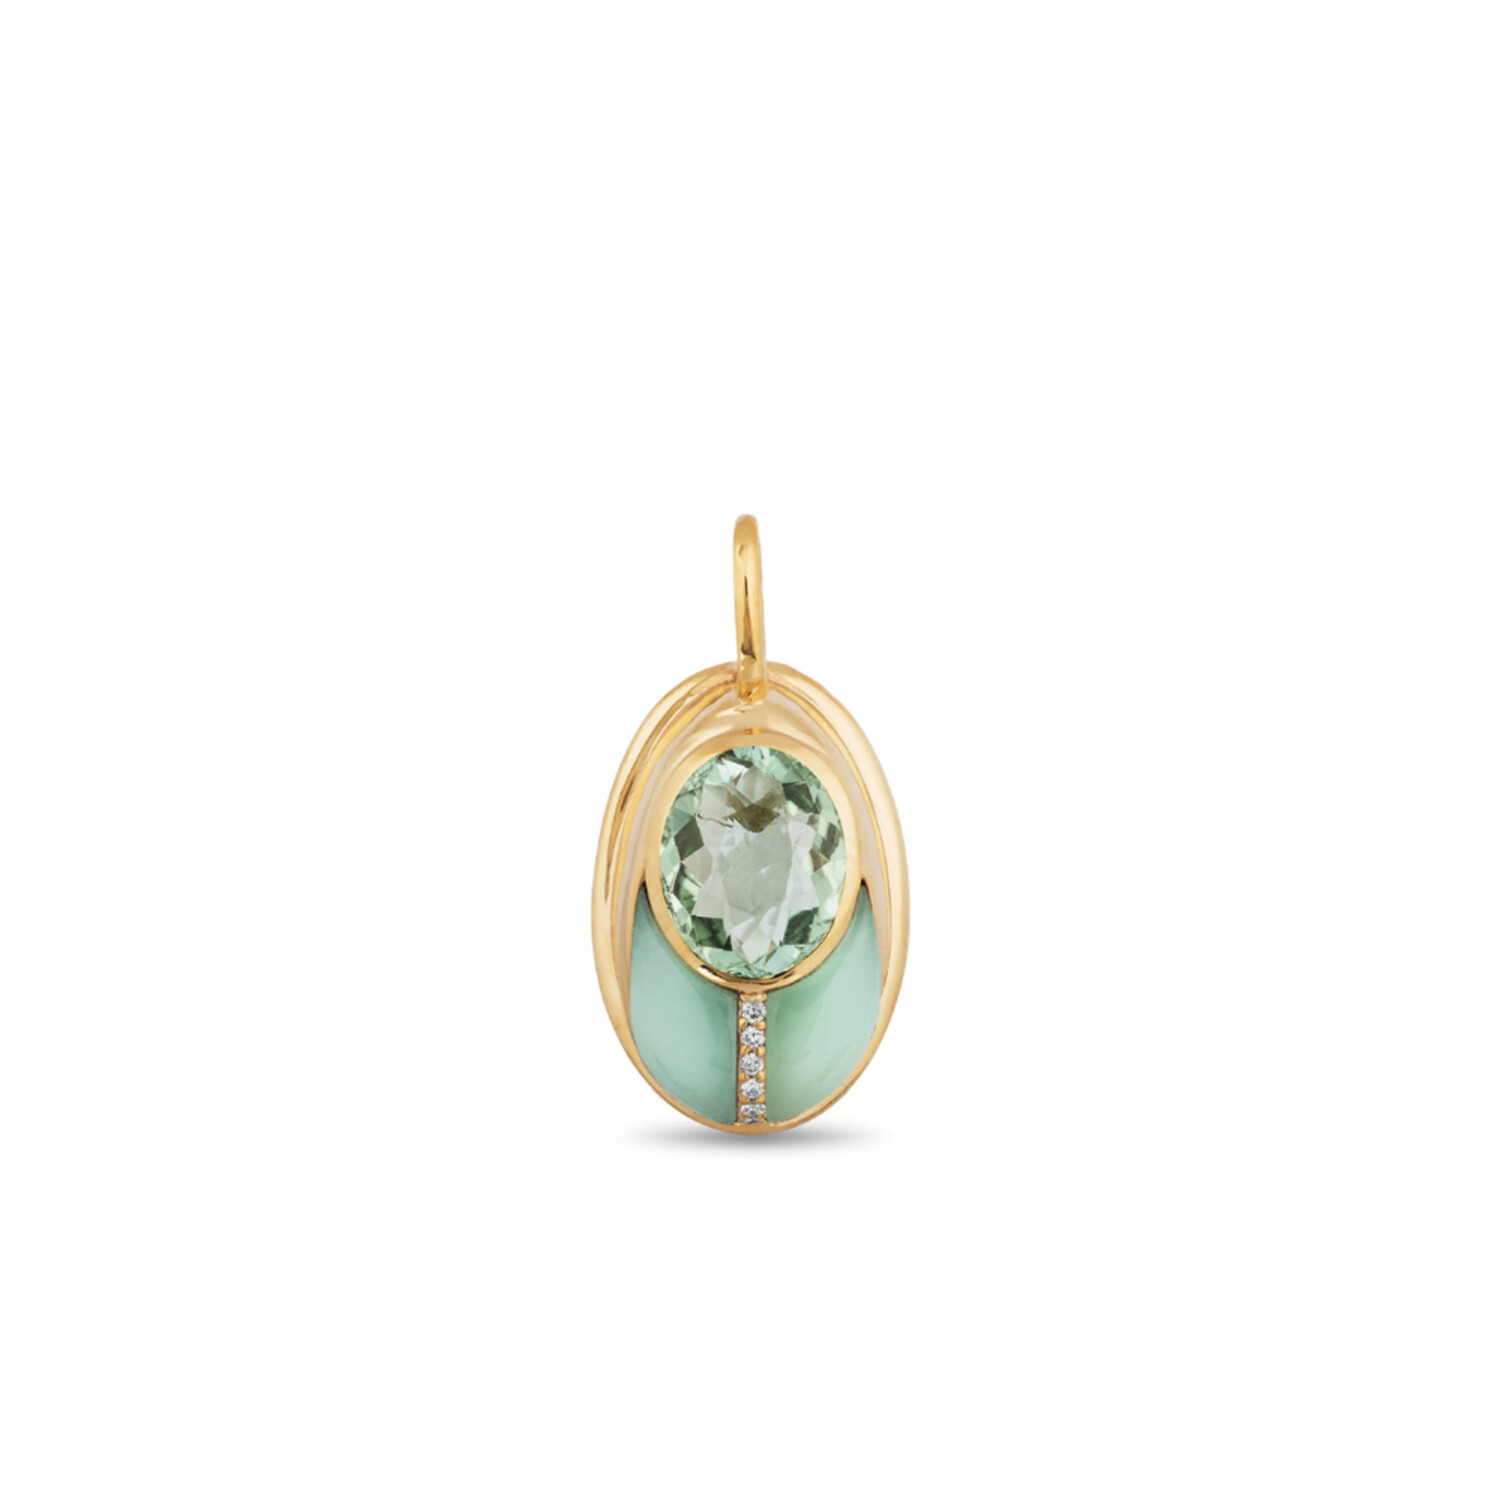 Mint Opal and Mint Tourmaline Love Bug Pendant in 14K Yellow Gold